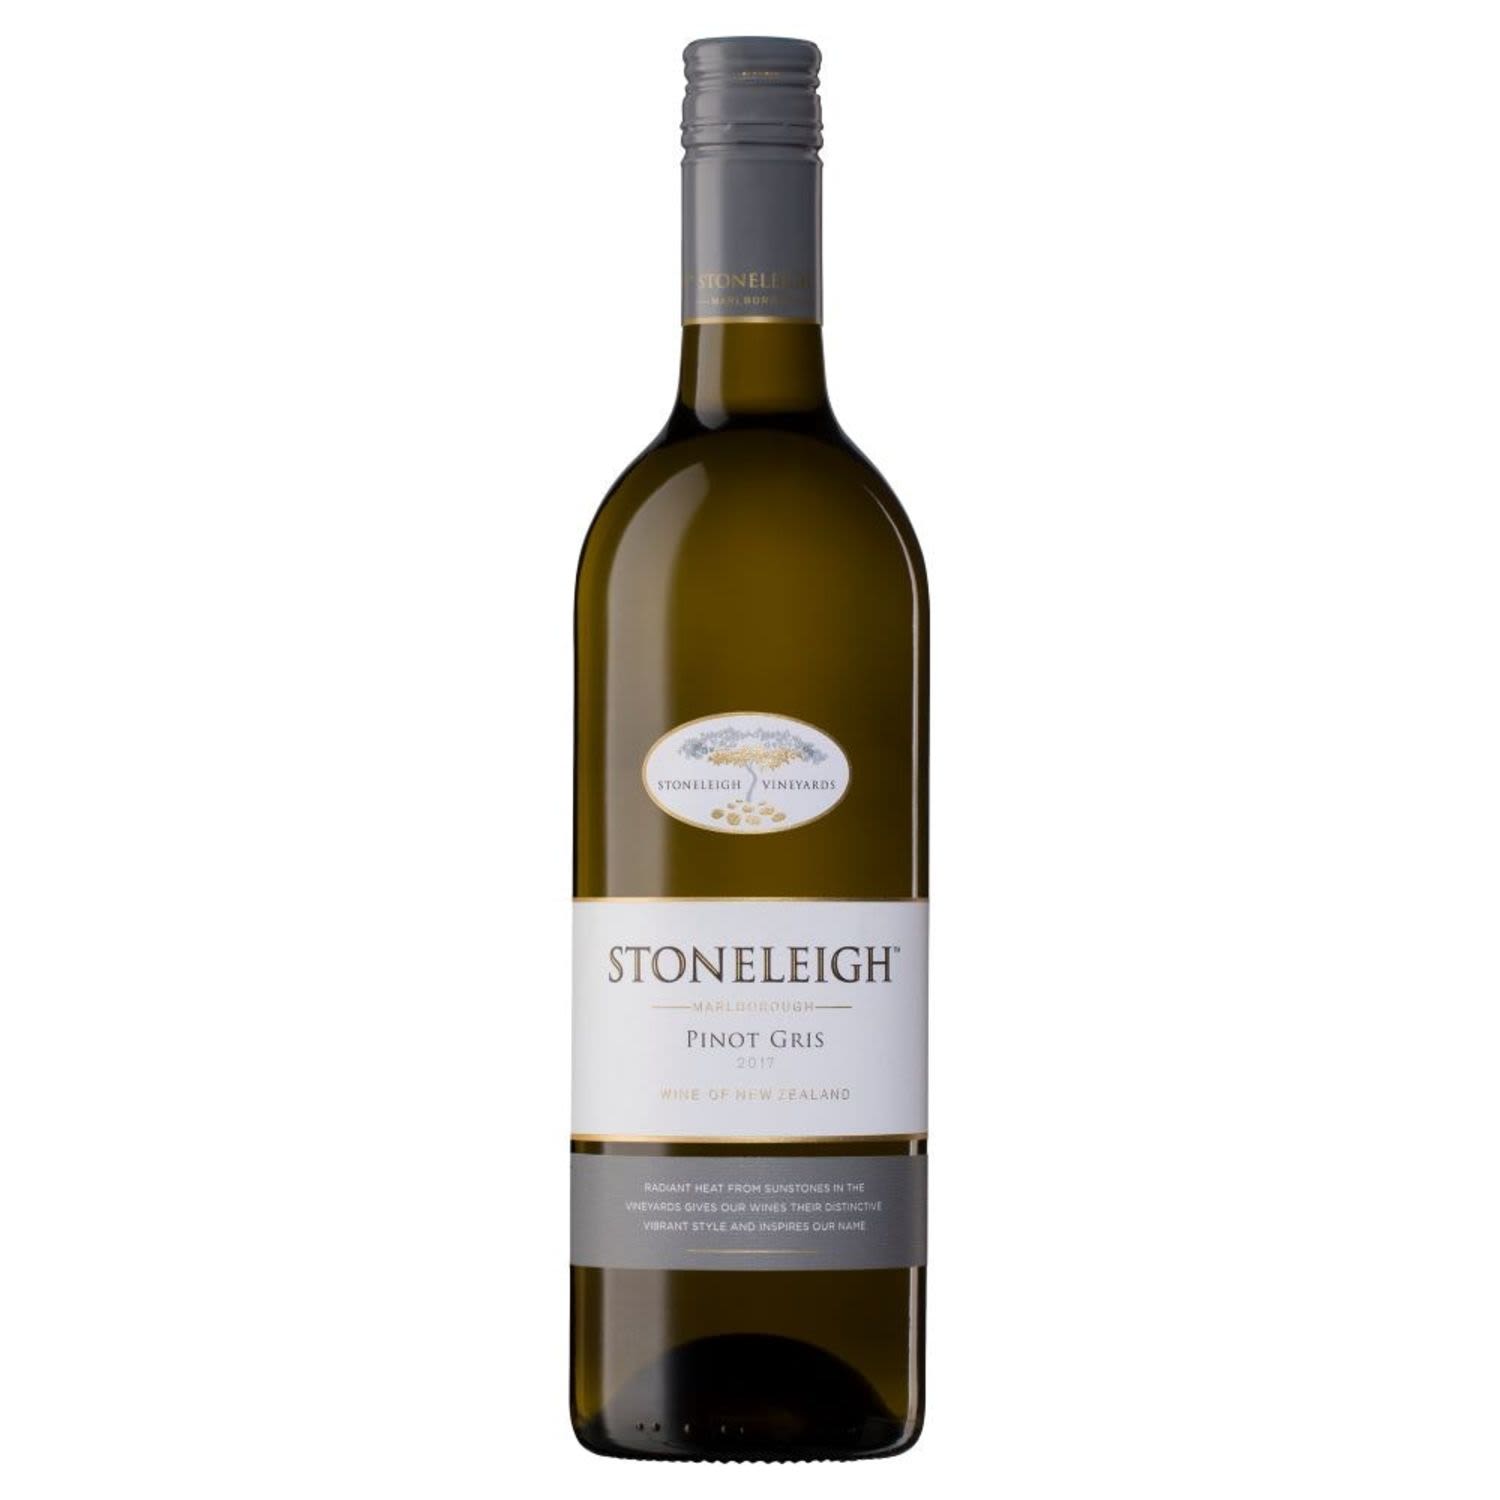 Stoneleigh Pinot Gris is sourced from some fine vineyards in Marlborough. It sings with fresh pears, red apples & a nuance of spicy apple pie.<br /> <br />Alcohol Volume: 13.90%<br /><br />Pack Format: Bottle<br /><br />Standard Drinks: 8.3</br /><br />Pack Type: Bottle<br /><br />Country of Origin: New Zealand<br /><br />Region: Marlborough<br /><br />Vintage: Vintages Vary<br />